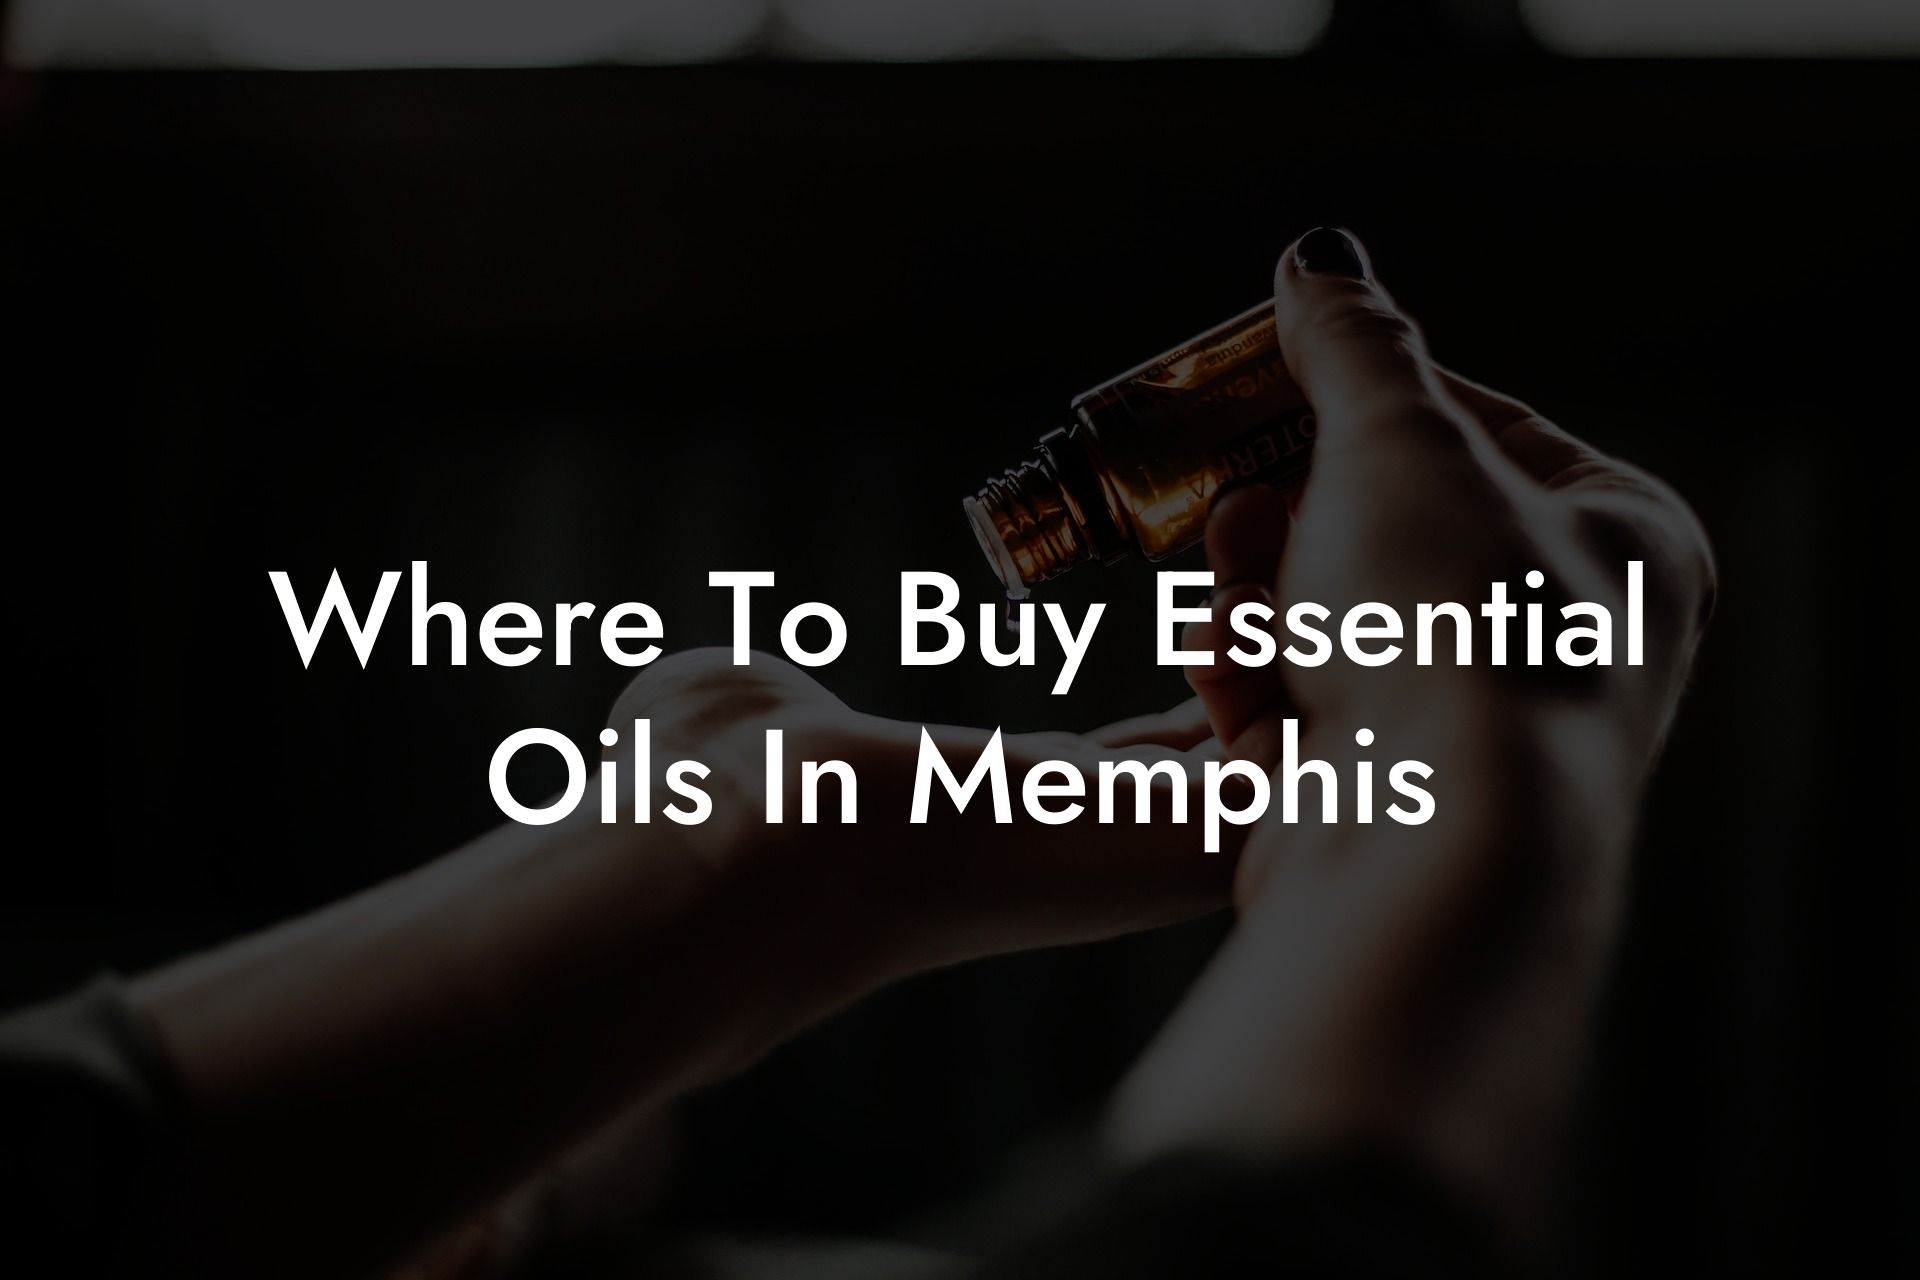 Where To Buy Essential Oils In Memphis